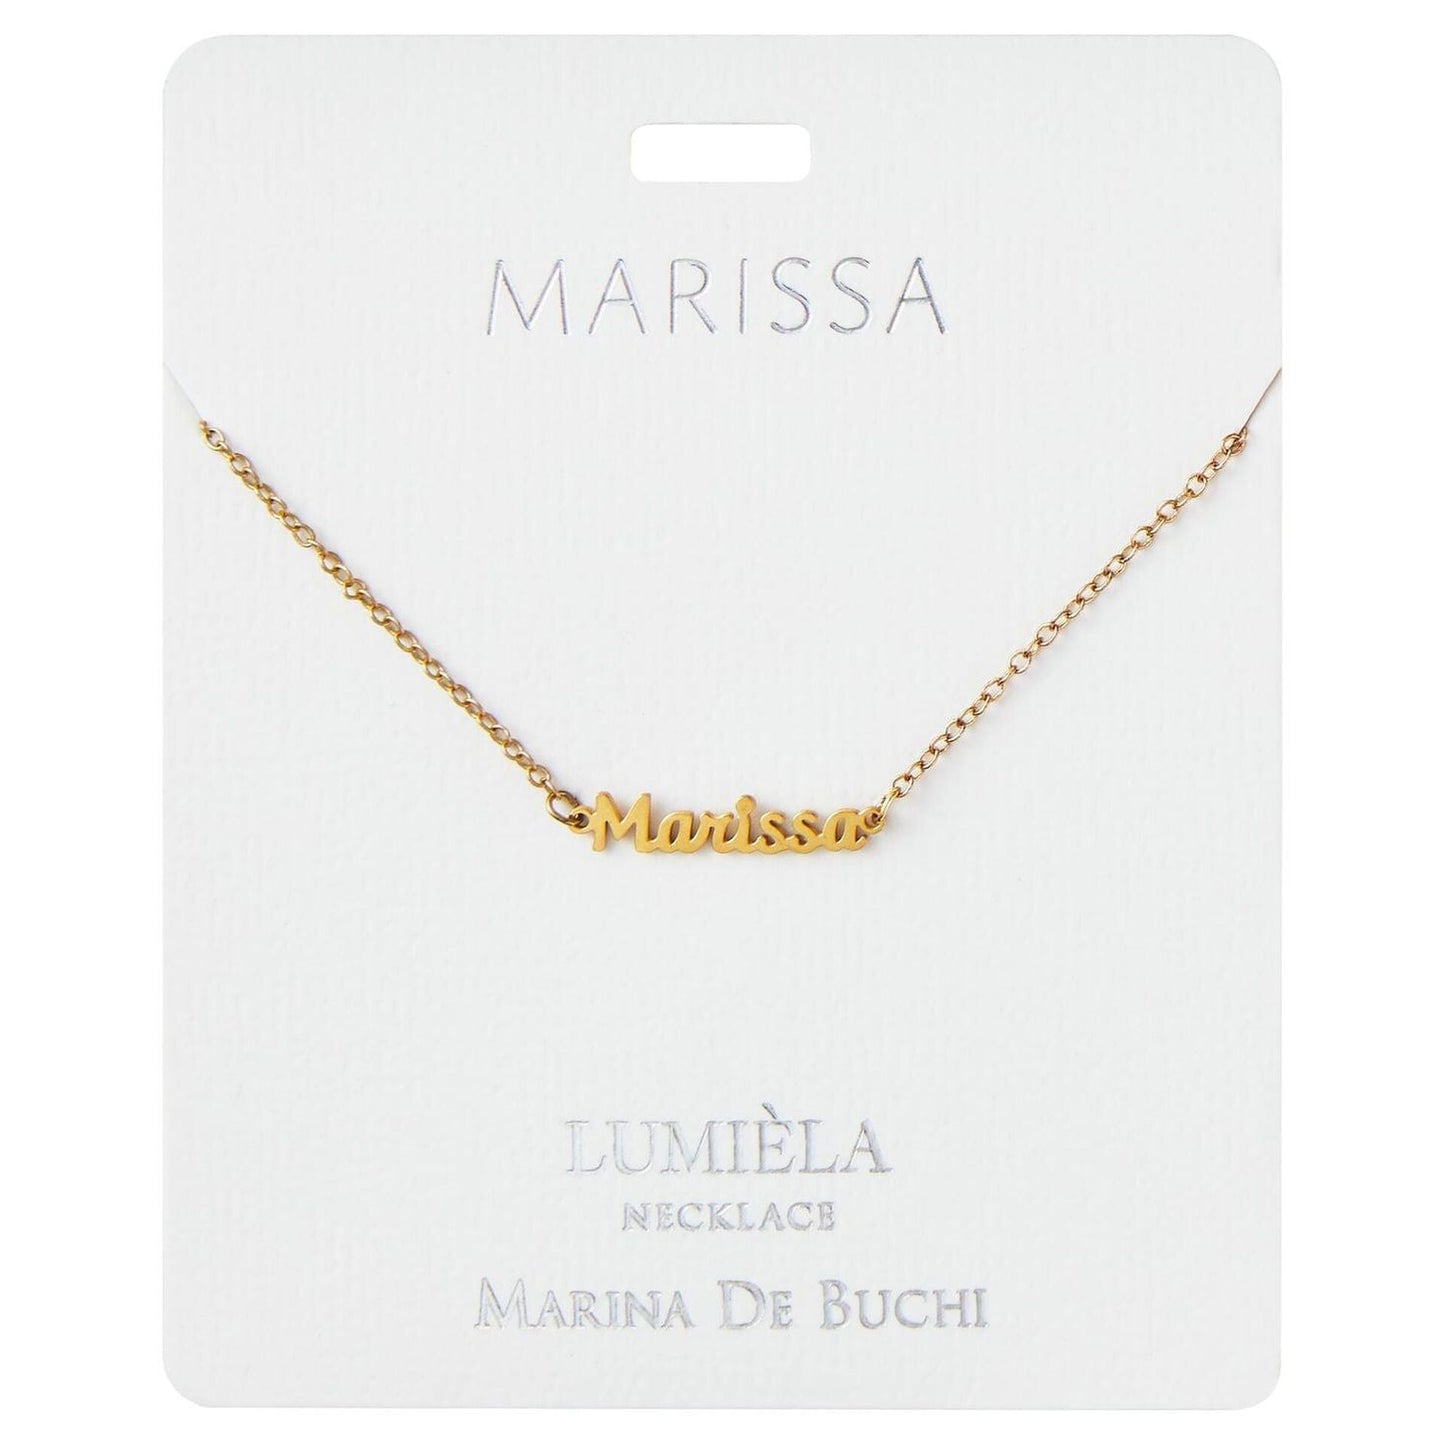 Lumiela Personalized Nameplate Katie Necklace in Gold Tone